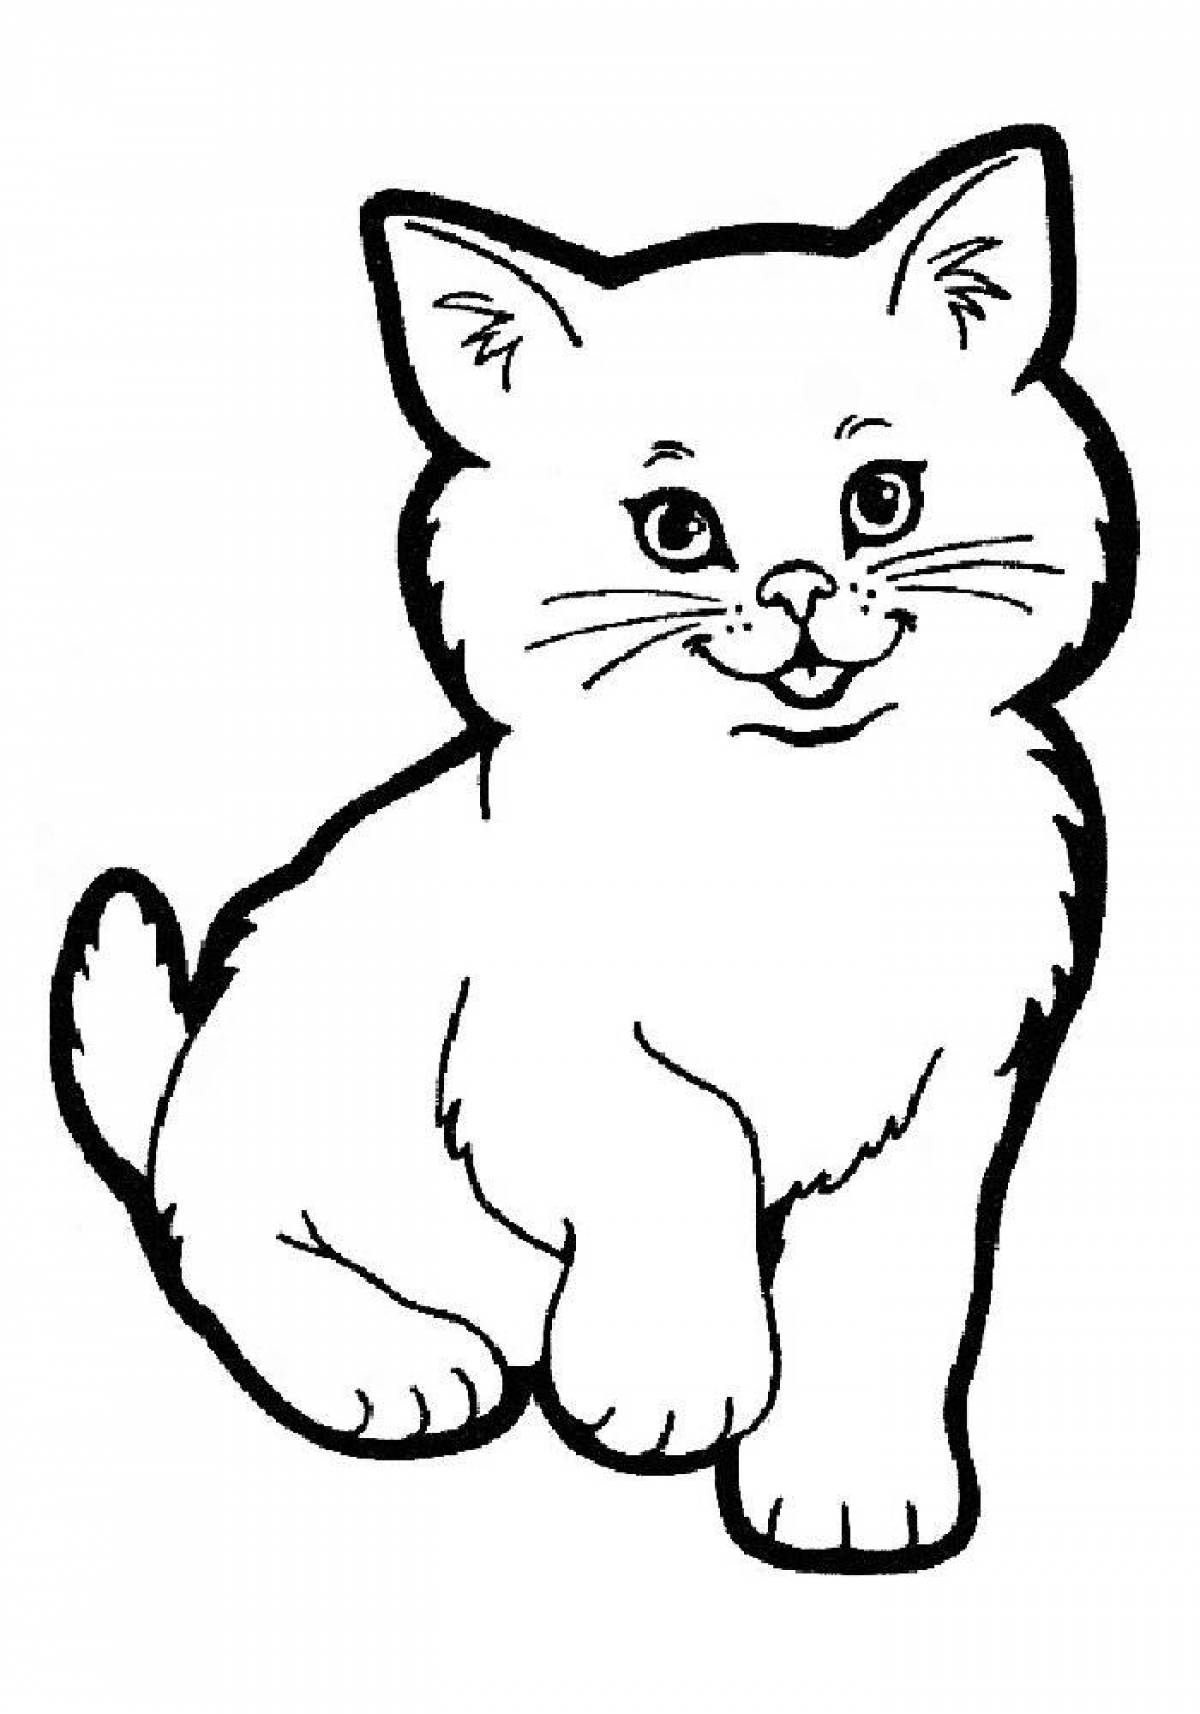 Coloring book big-pawed kitten for children